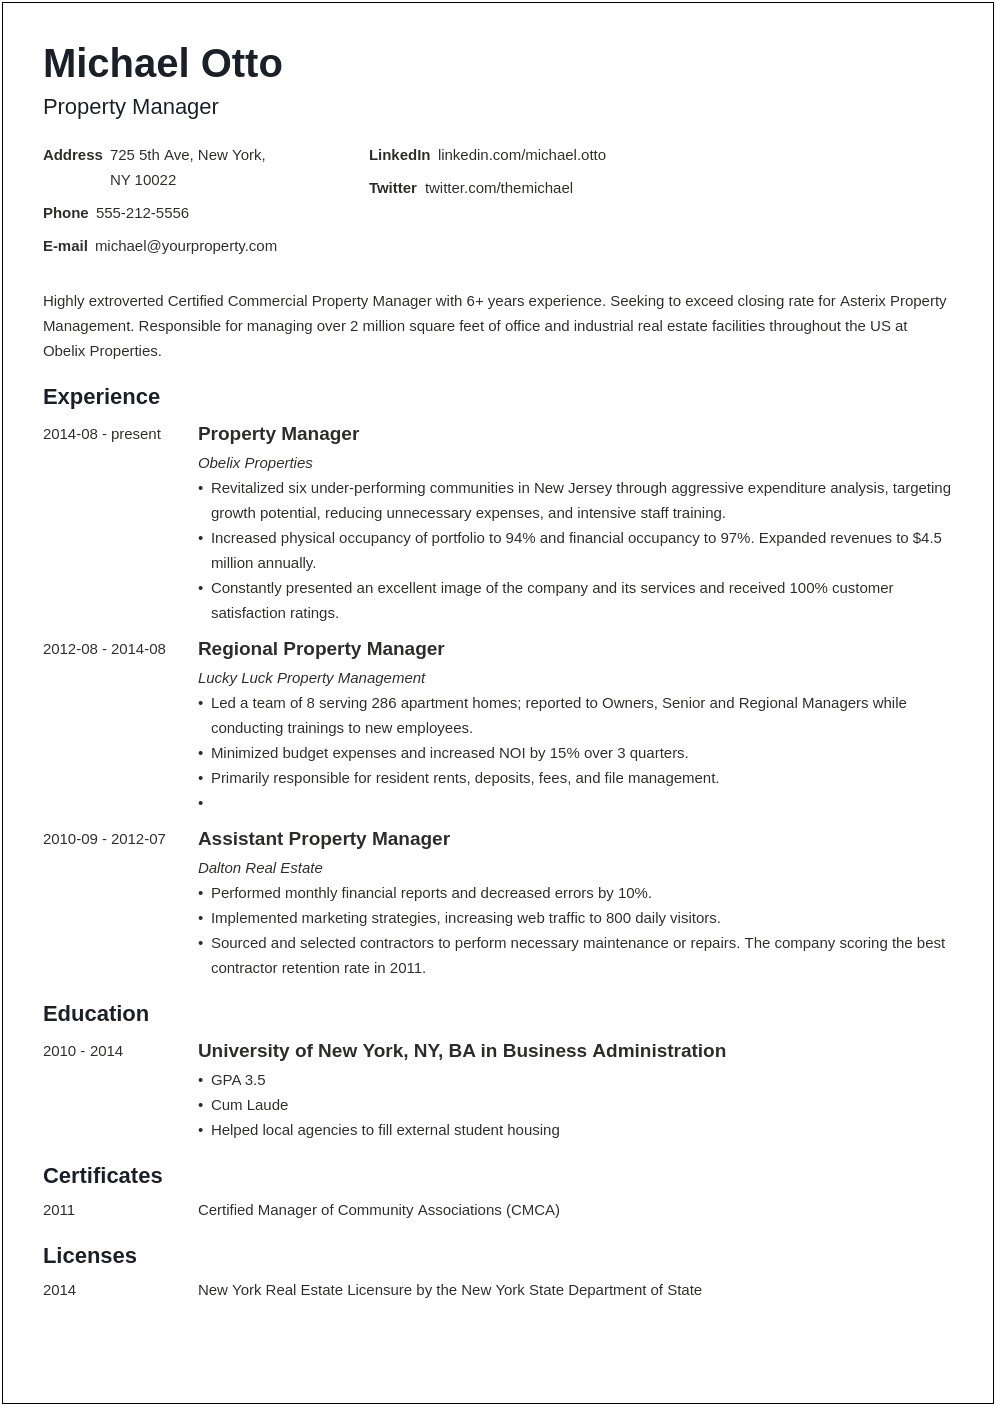 Example Resume For Property Manager